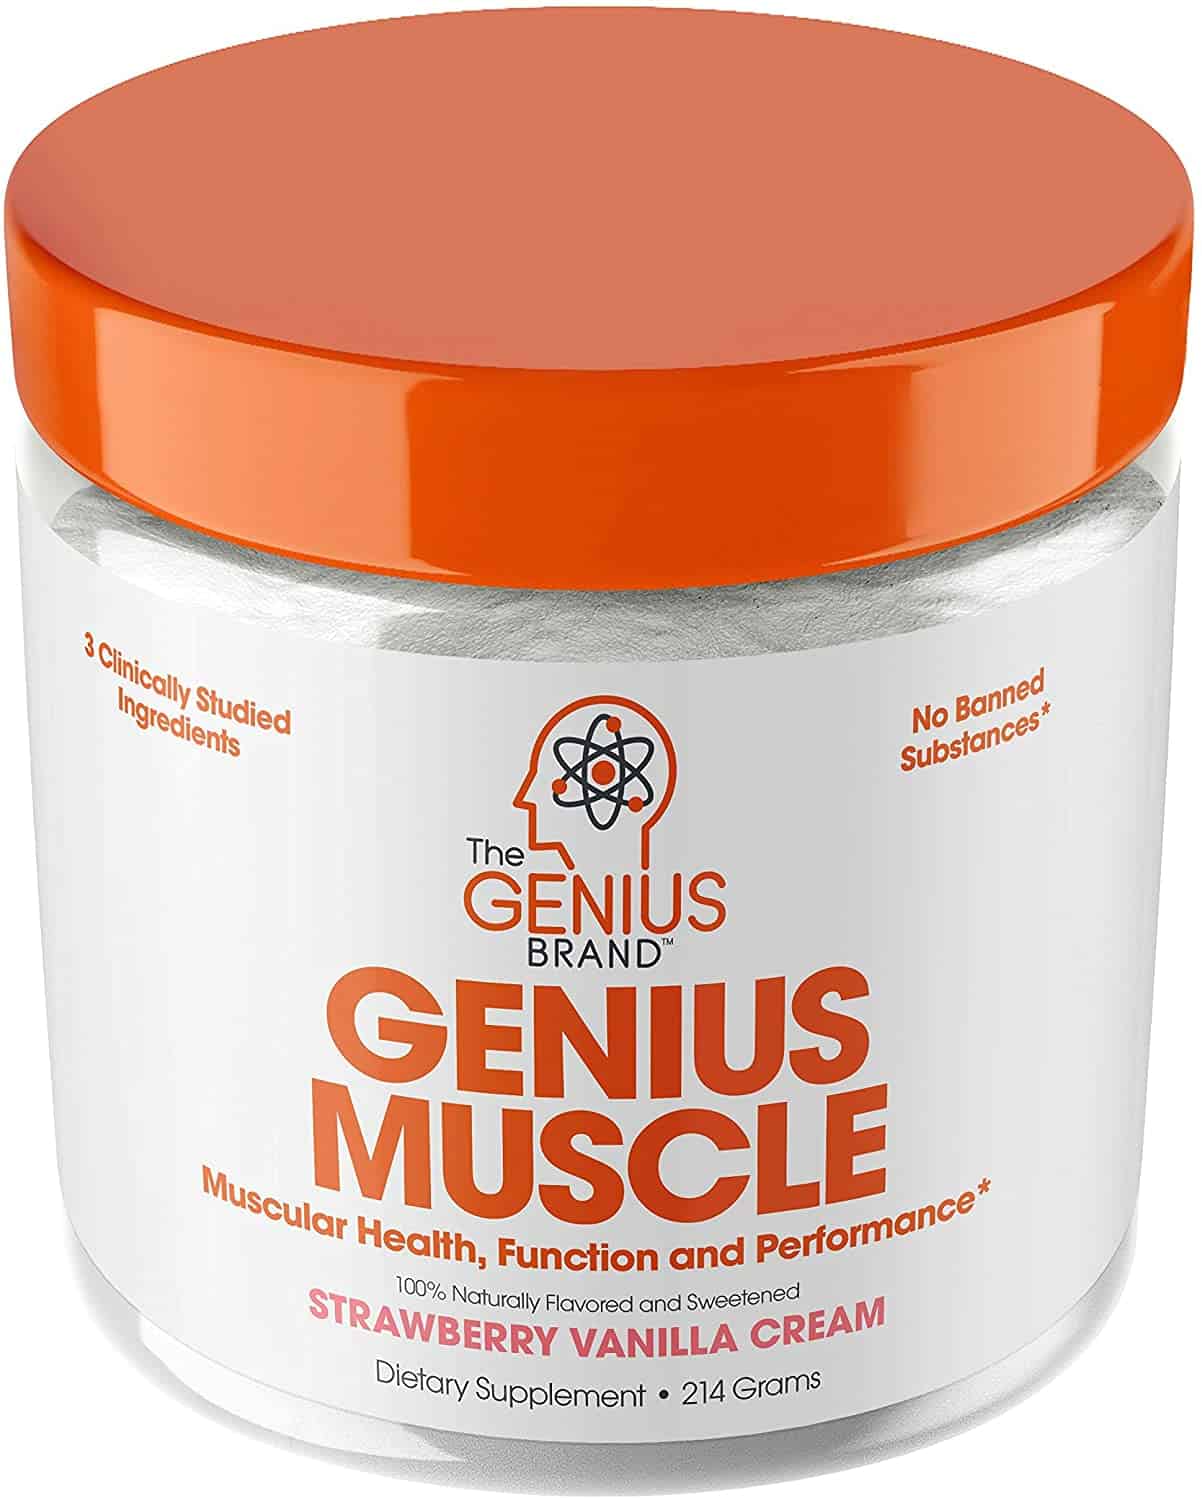 Genius Muscle ranks as one of the best pre workout supplements